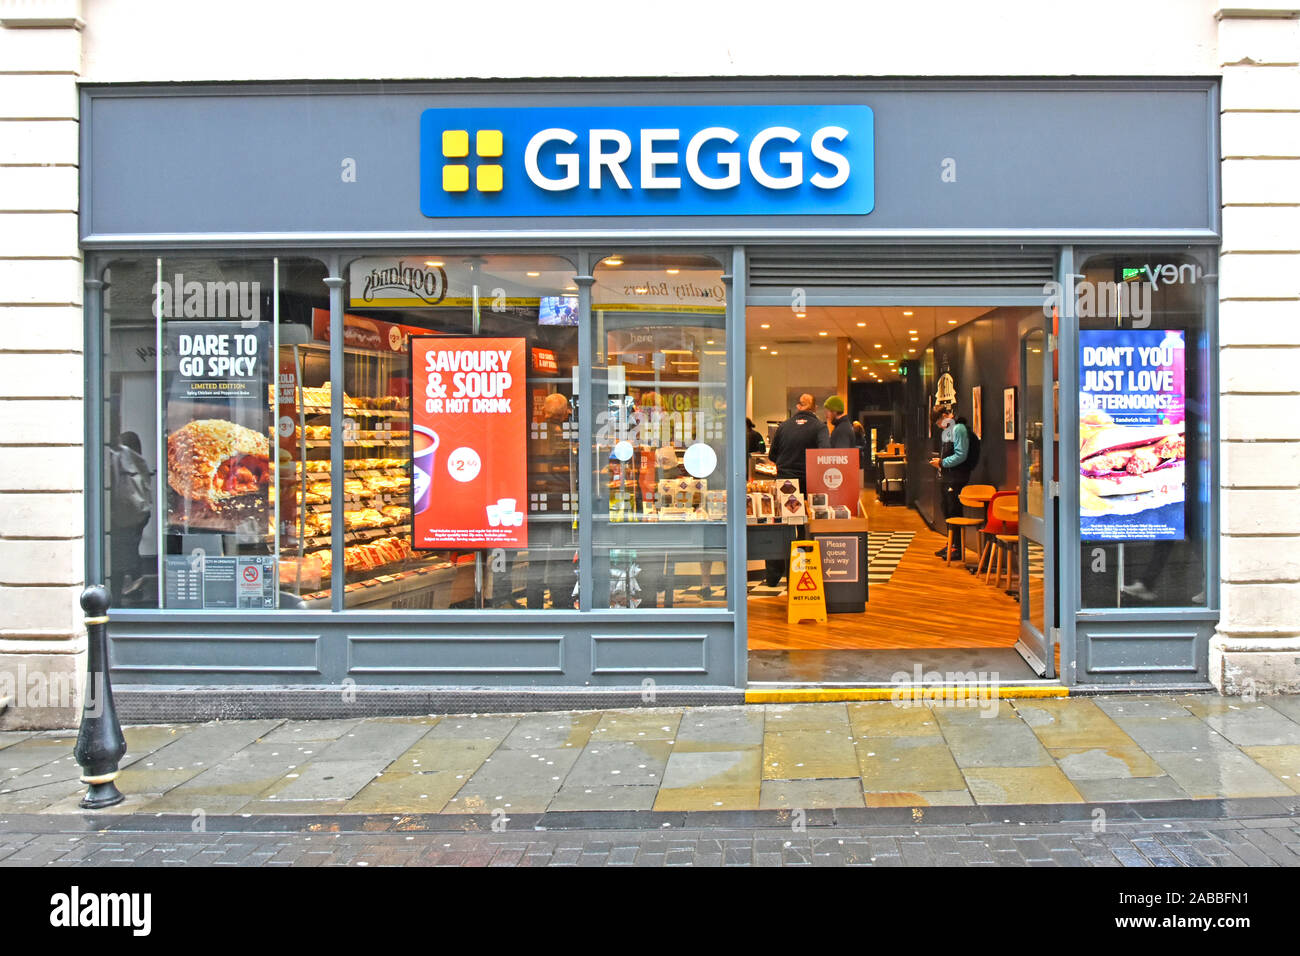 Shop front & interior Greggs sandwiches pies pastries & bakery food store with customers & tables indoors out of wet rainy exterior Durham England UK Stock Photo